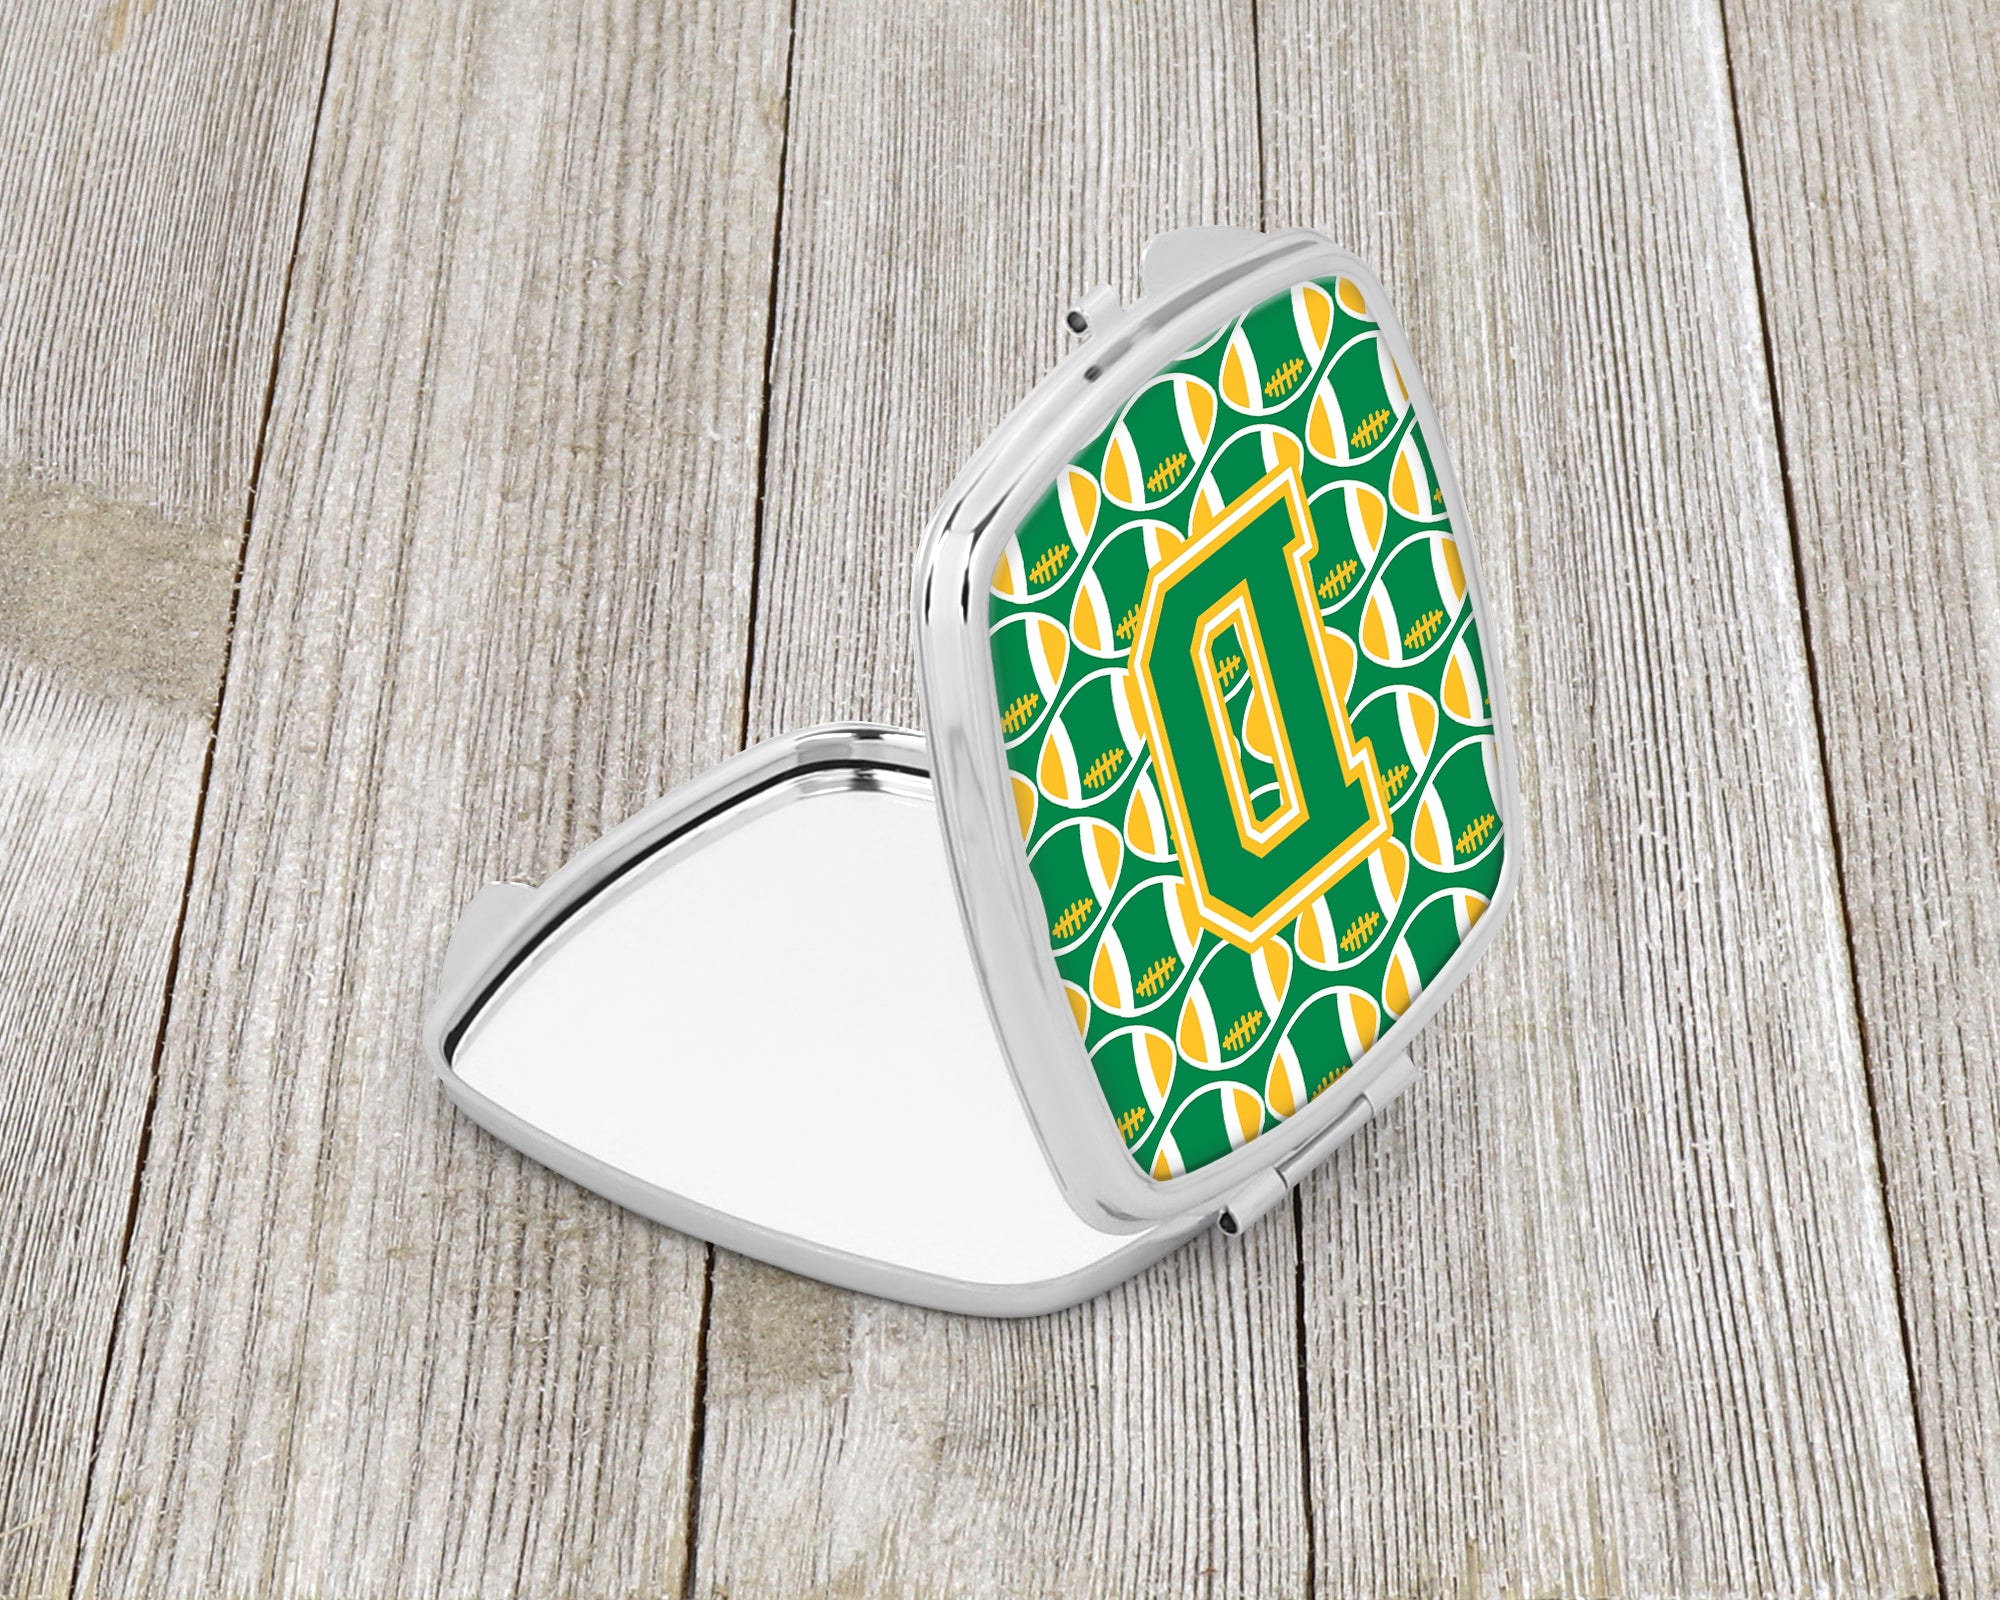 Letter D Football Green and Gold Compact Mirror CJ1069-DSCM